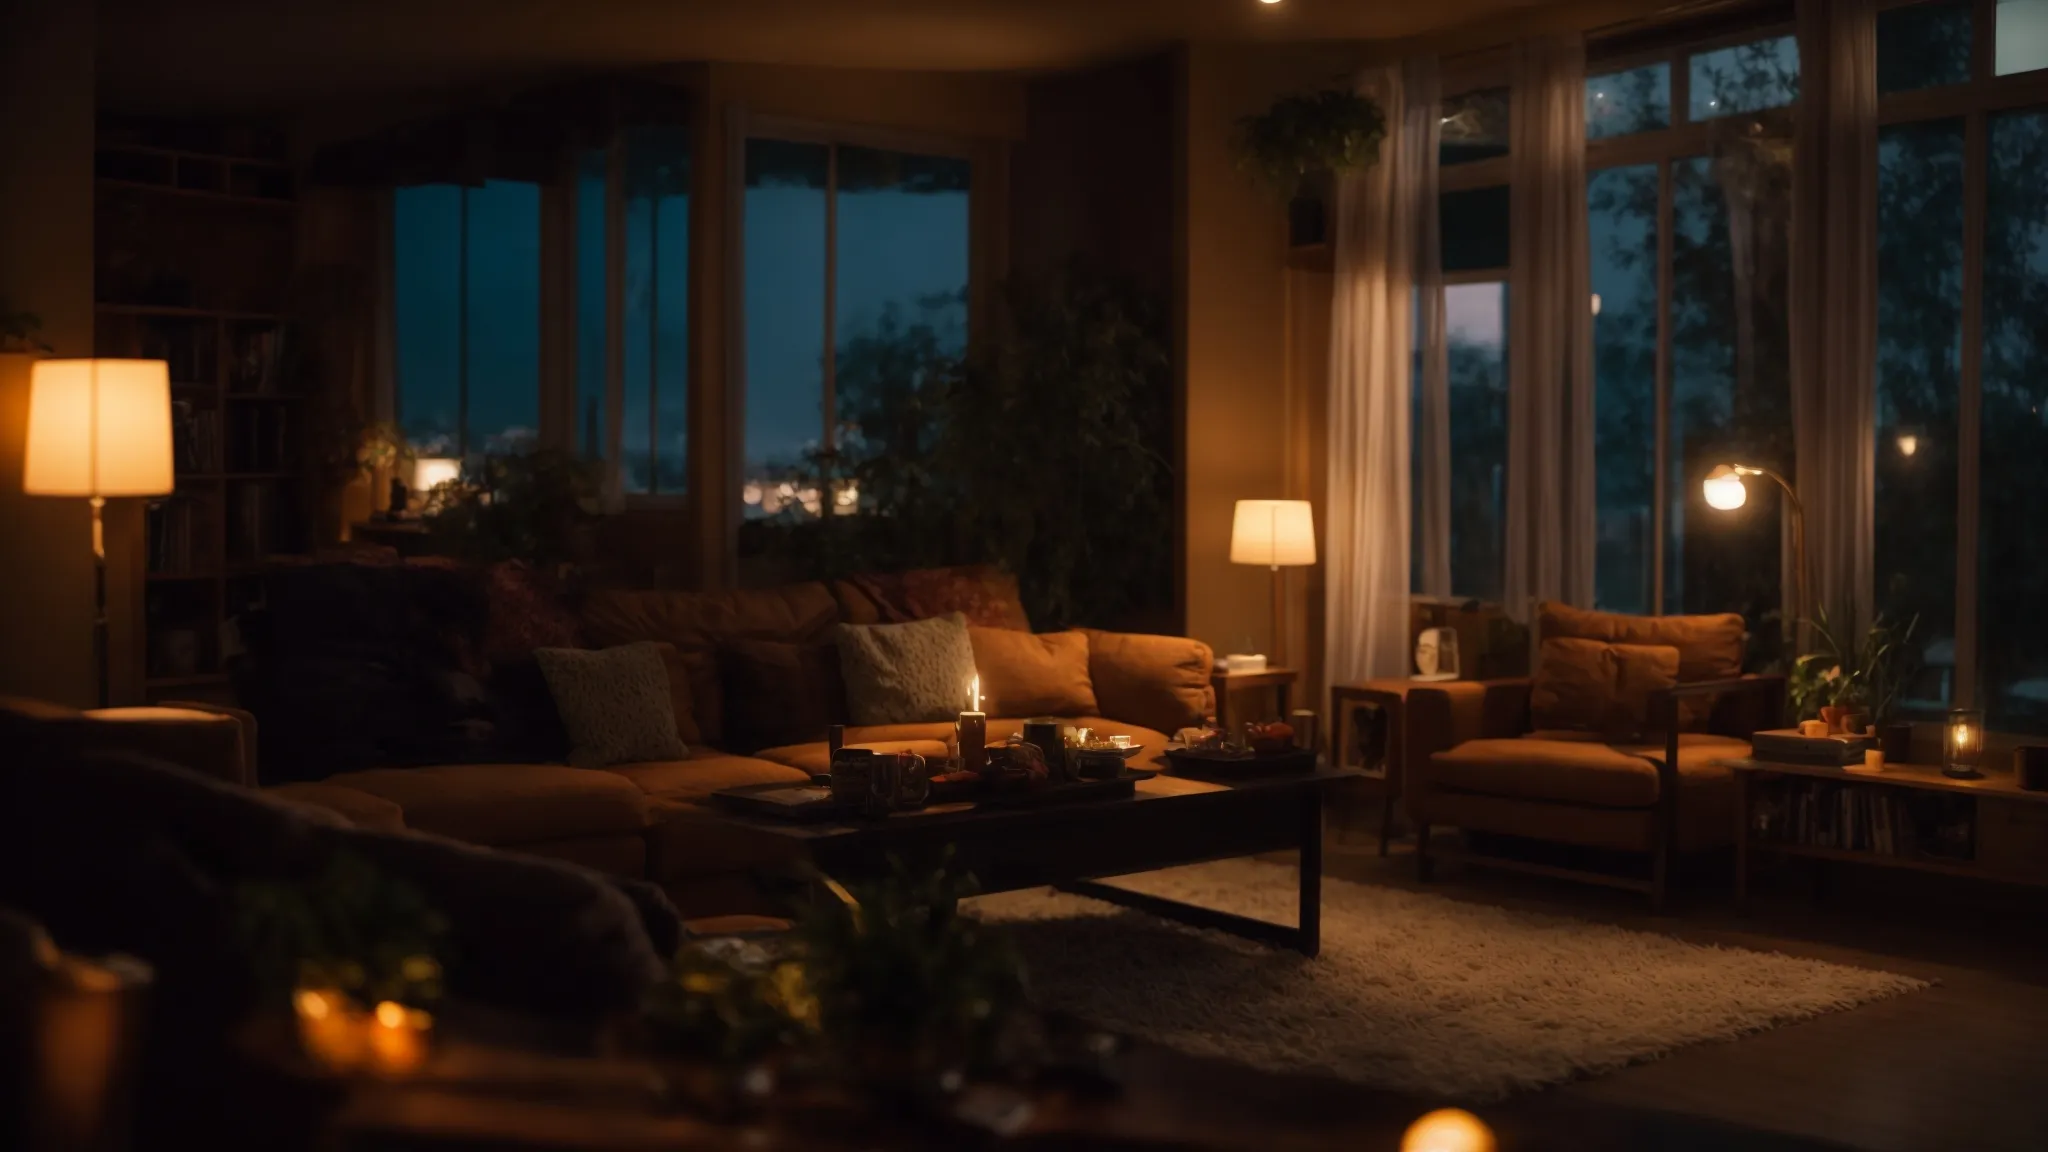 a cozy living room at night, illuminated by the warm glow of a television screen, inviting someone to dive into the adventure of 